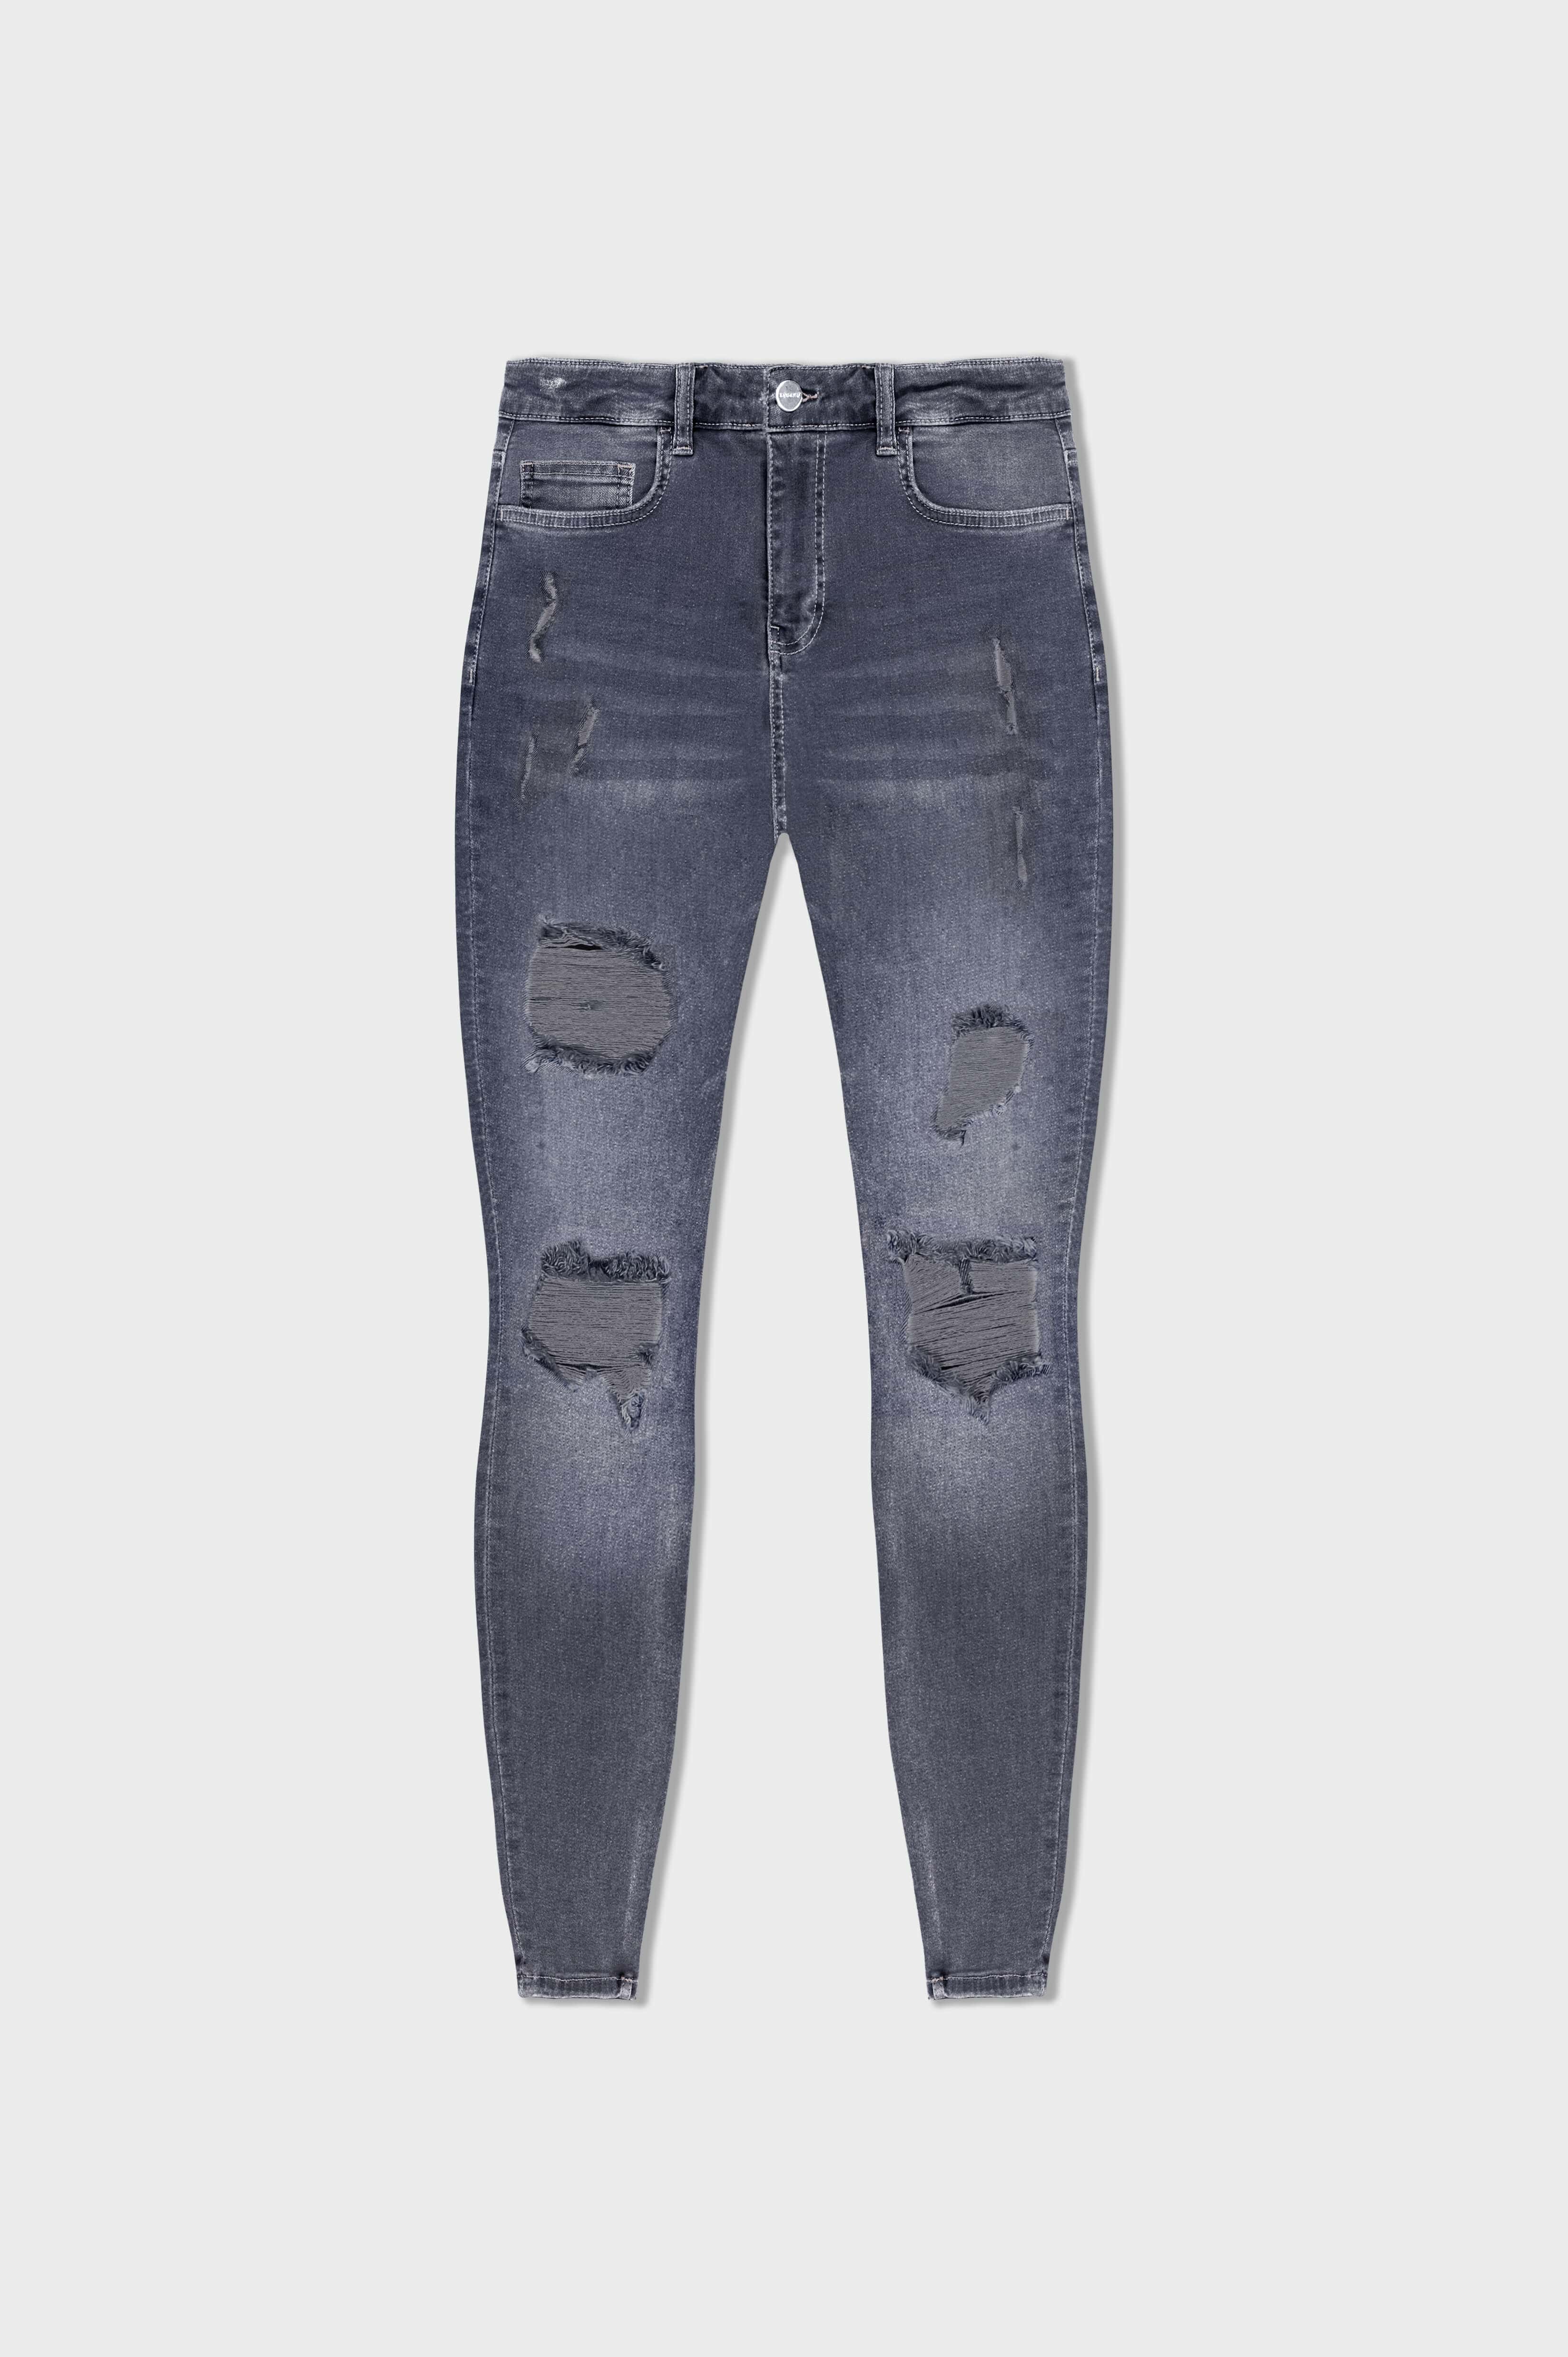 Legend London Jeans - spray on LIGHT GREY JEANS - RIPPED &amp; REPAIRED